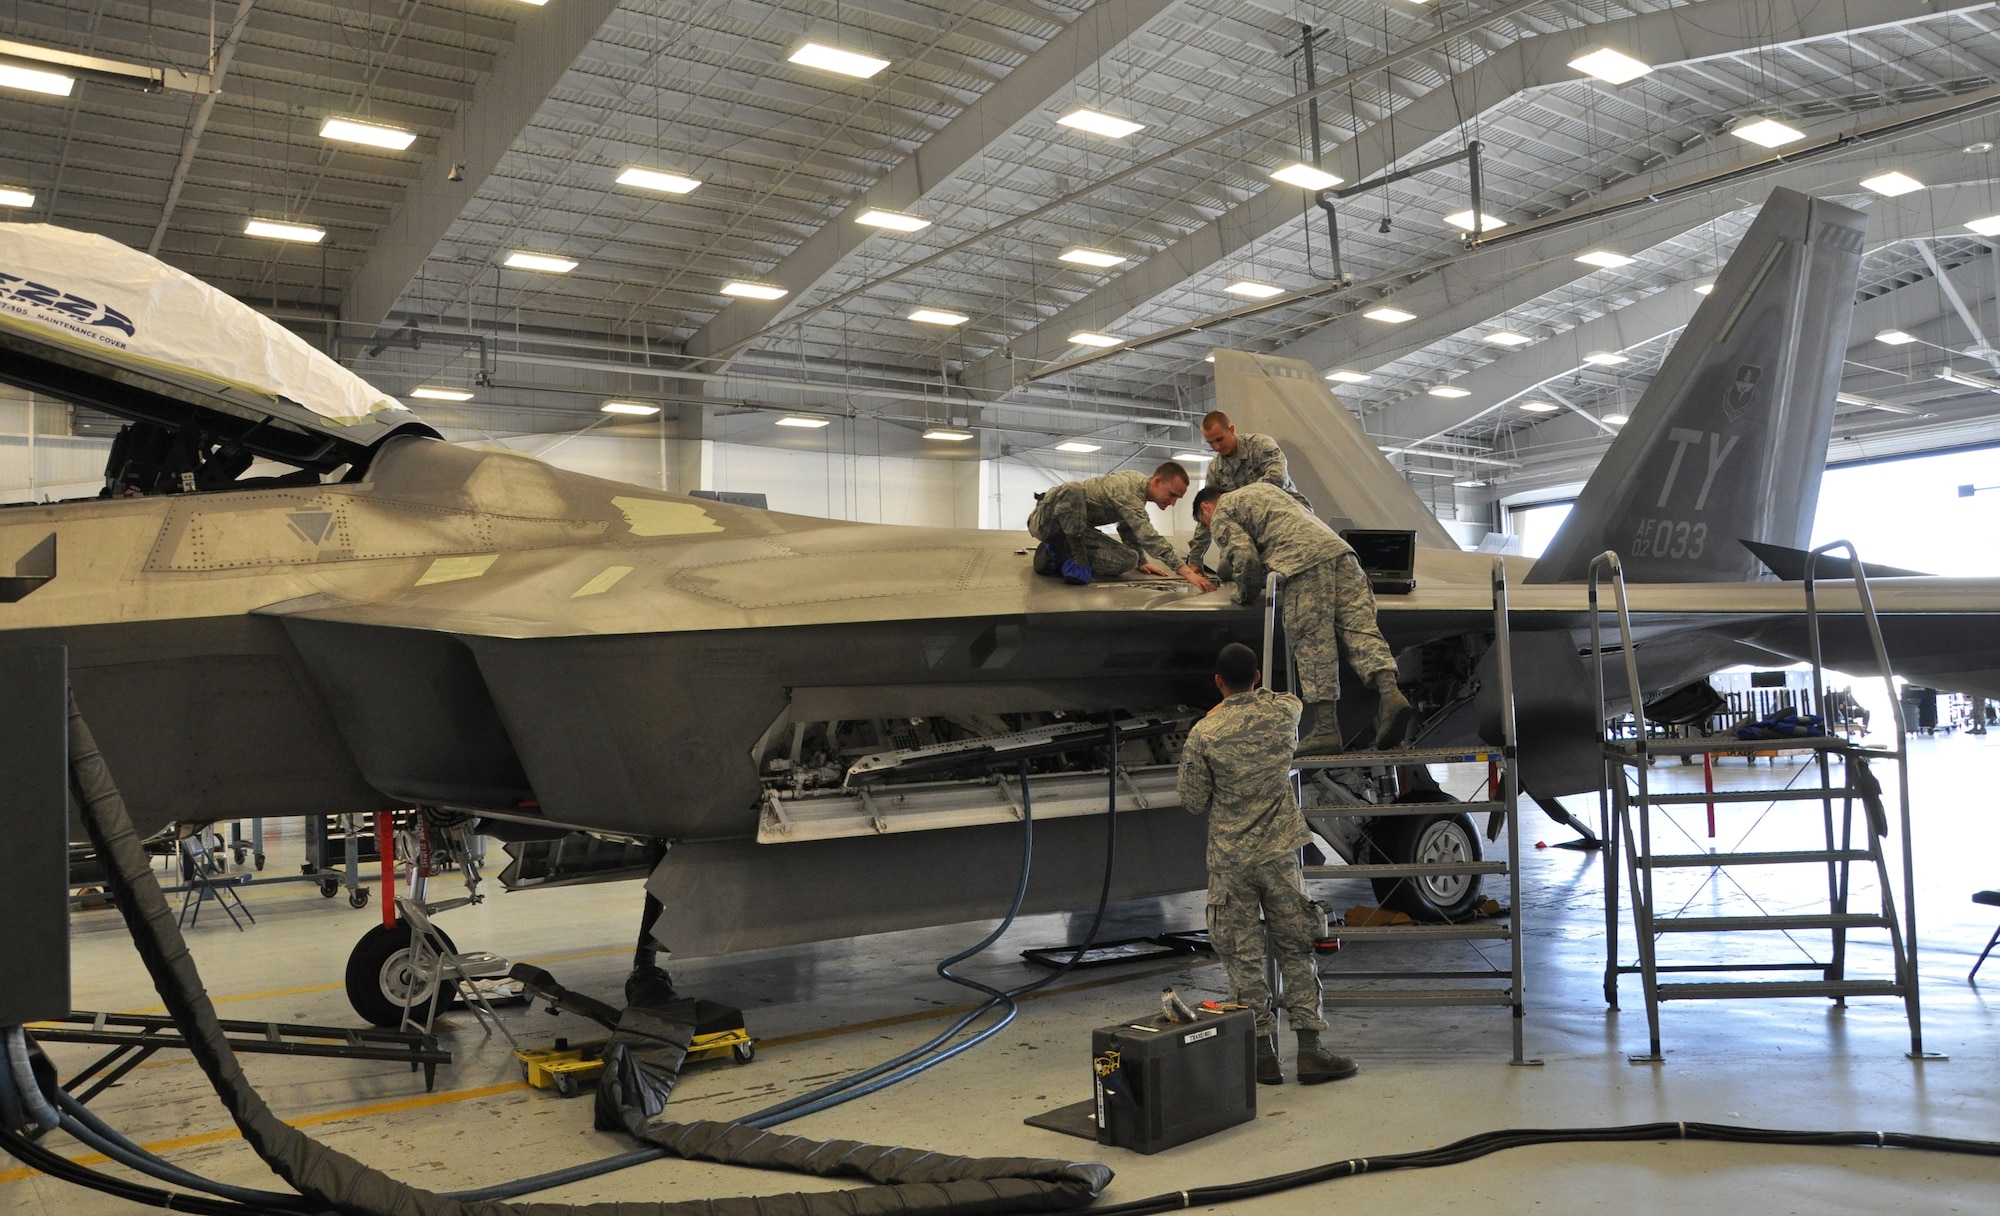 Tech. Sgt. Kraig Callais, 43rd Aircraft Maintenance Unit avionics fleet health manager; Senior Airman Christopher Dunn, 43rd AMU F-22 specialist; Airman 1st Class Kenan Harvey, 43rd AMU F-22 specialist; and Airman 1st Class Daniel Ramize, 43rd AMU F-22 specialist, address an issue on an F-22 Raptor as part of Avionics Health of the Fleet inside the hangar of the 43rd AMU at Tyndall Air Force Base, Fla. AVHOF is a program implemented to increase the number of fully mission capable F-22s on Tyndall’s flight line. (U.S. Air Force photo by Airman 1st Class Alex Echols)